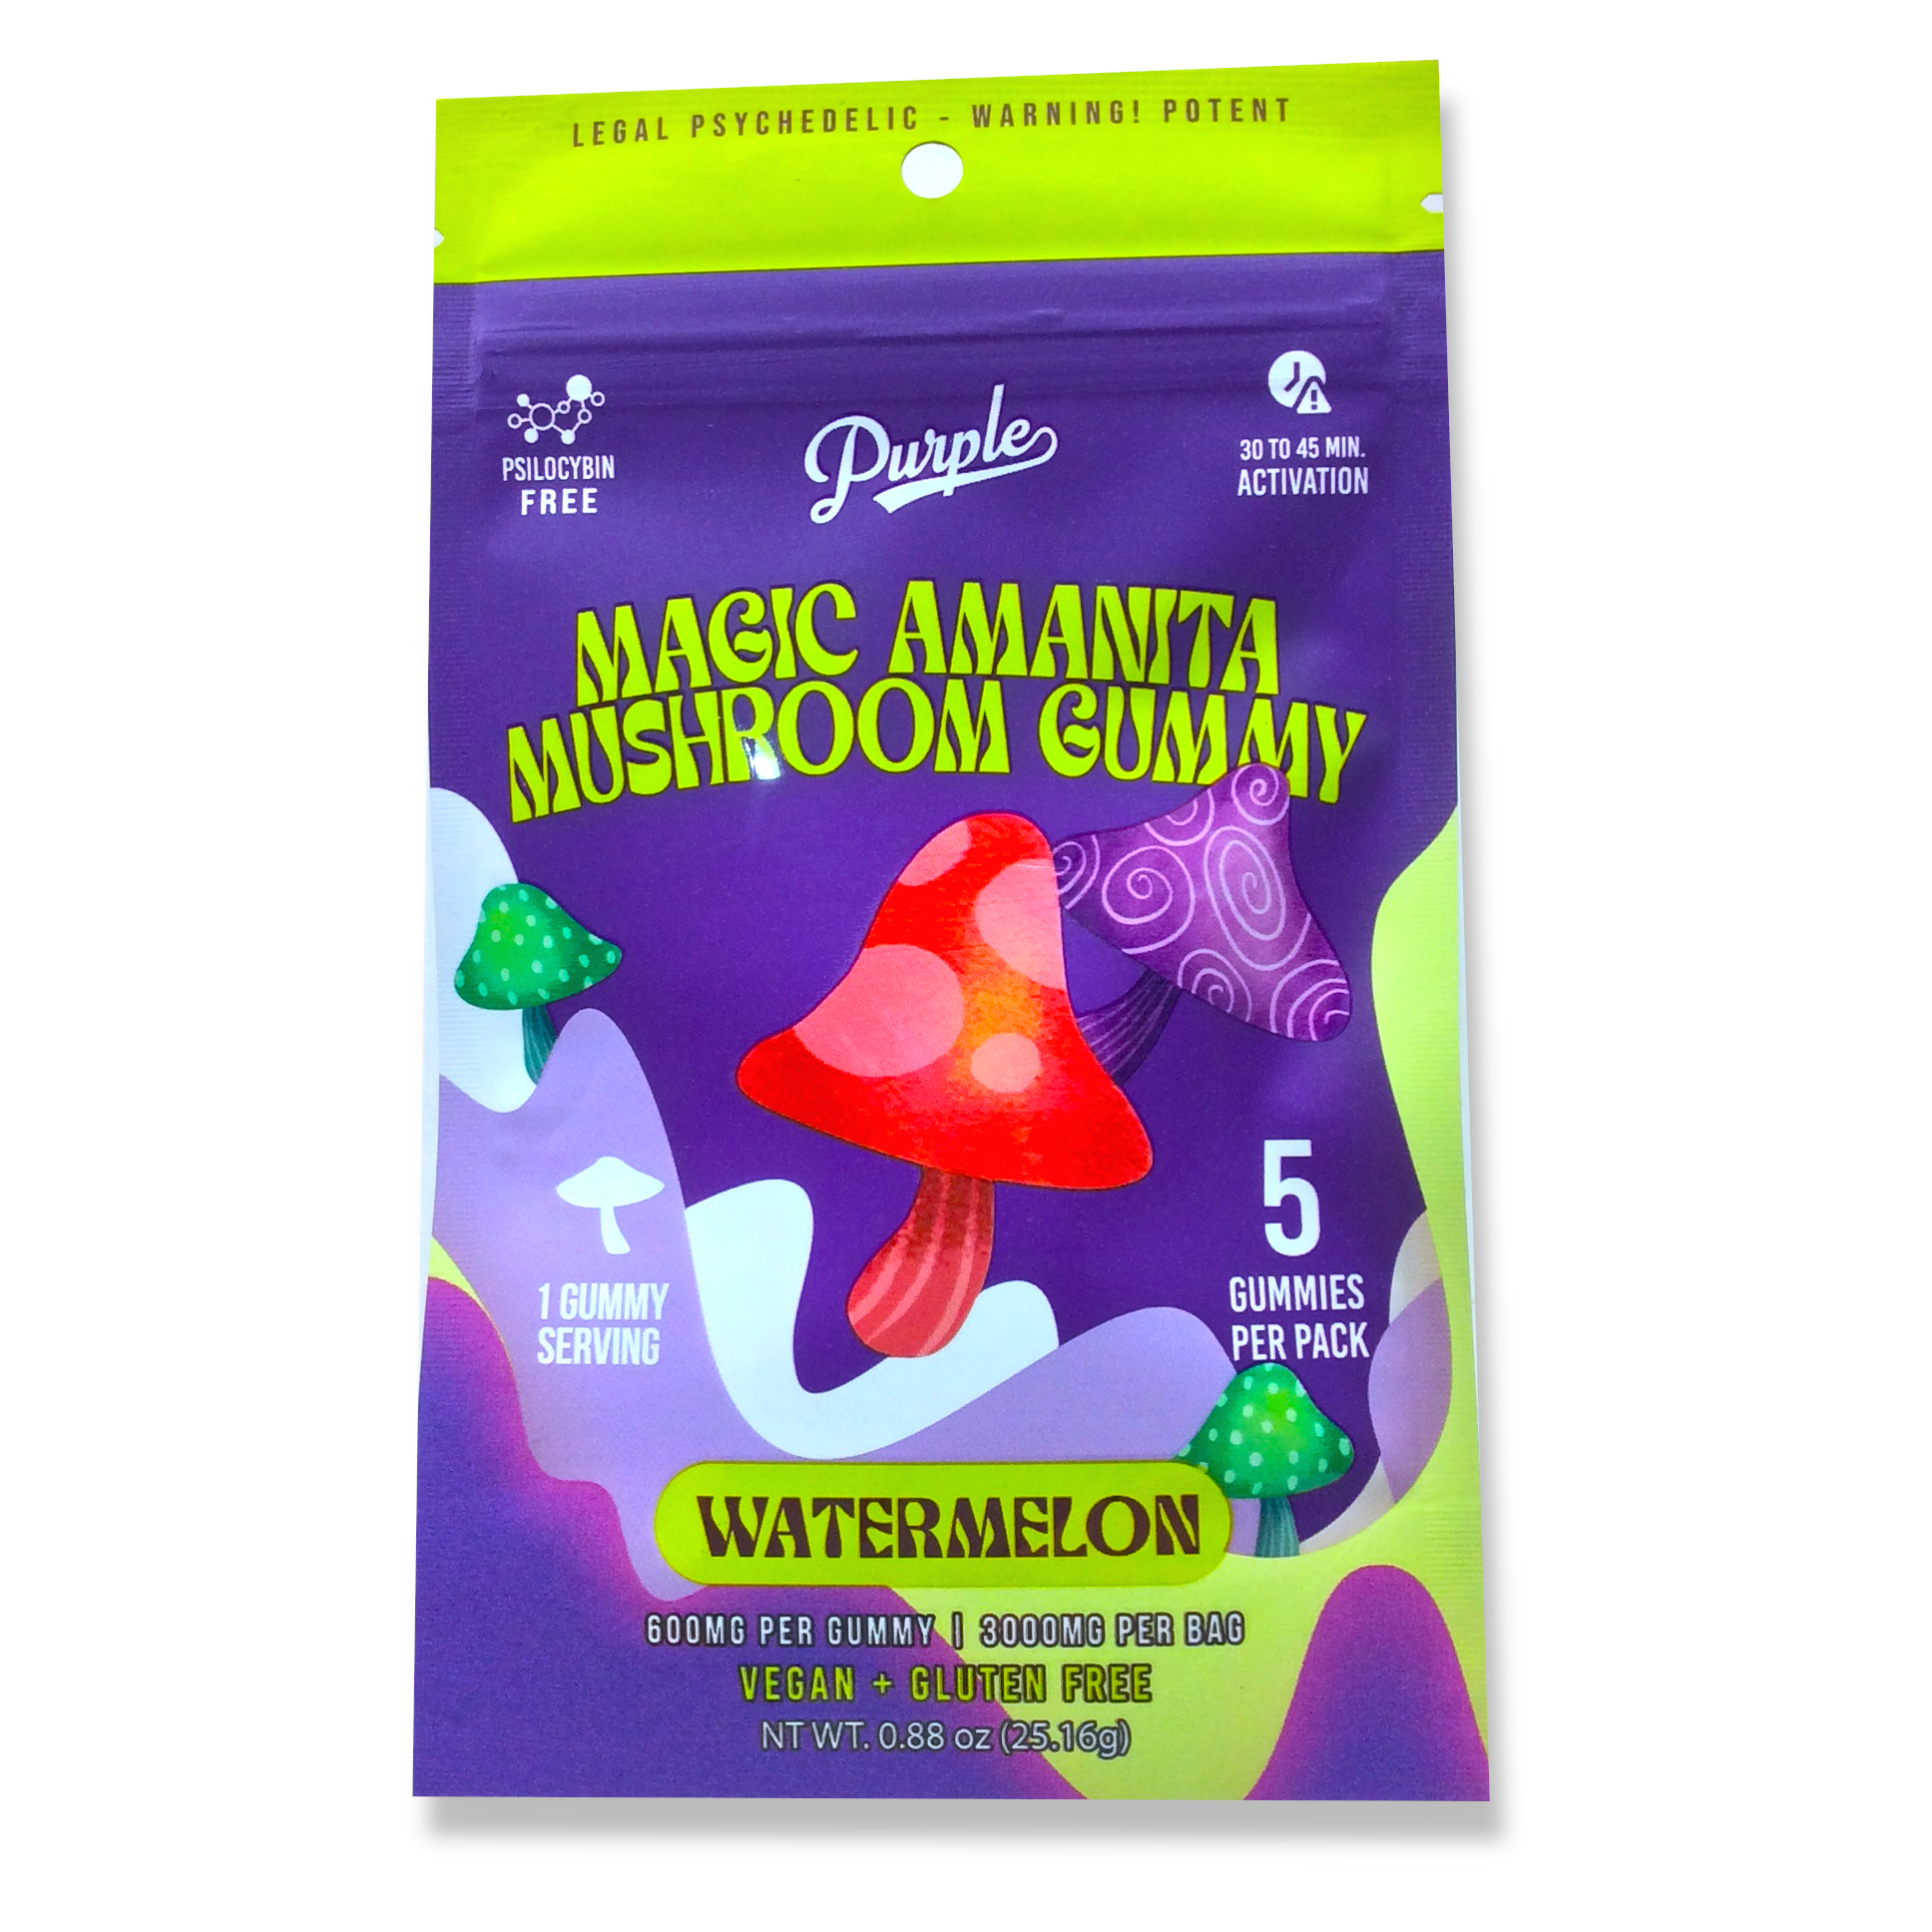 A Natural Remedy For Anxiety And Stress: Exhale’s Amanita Muscaria Gummies